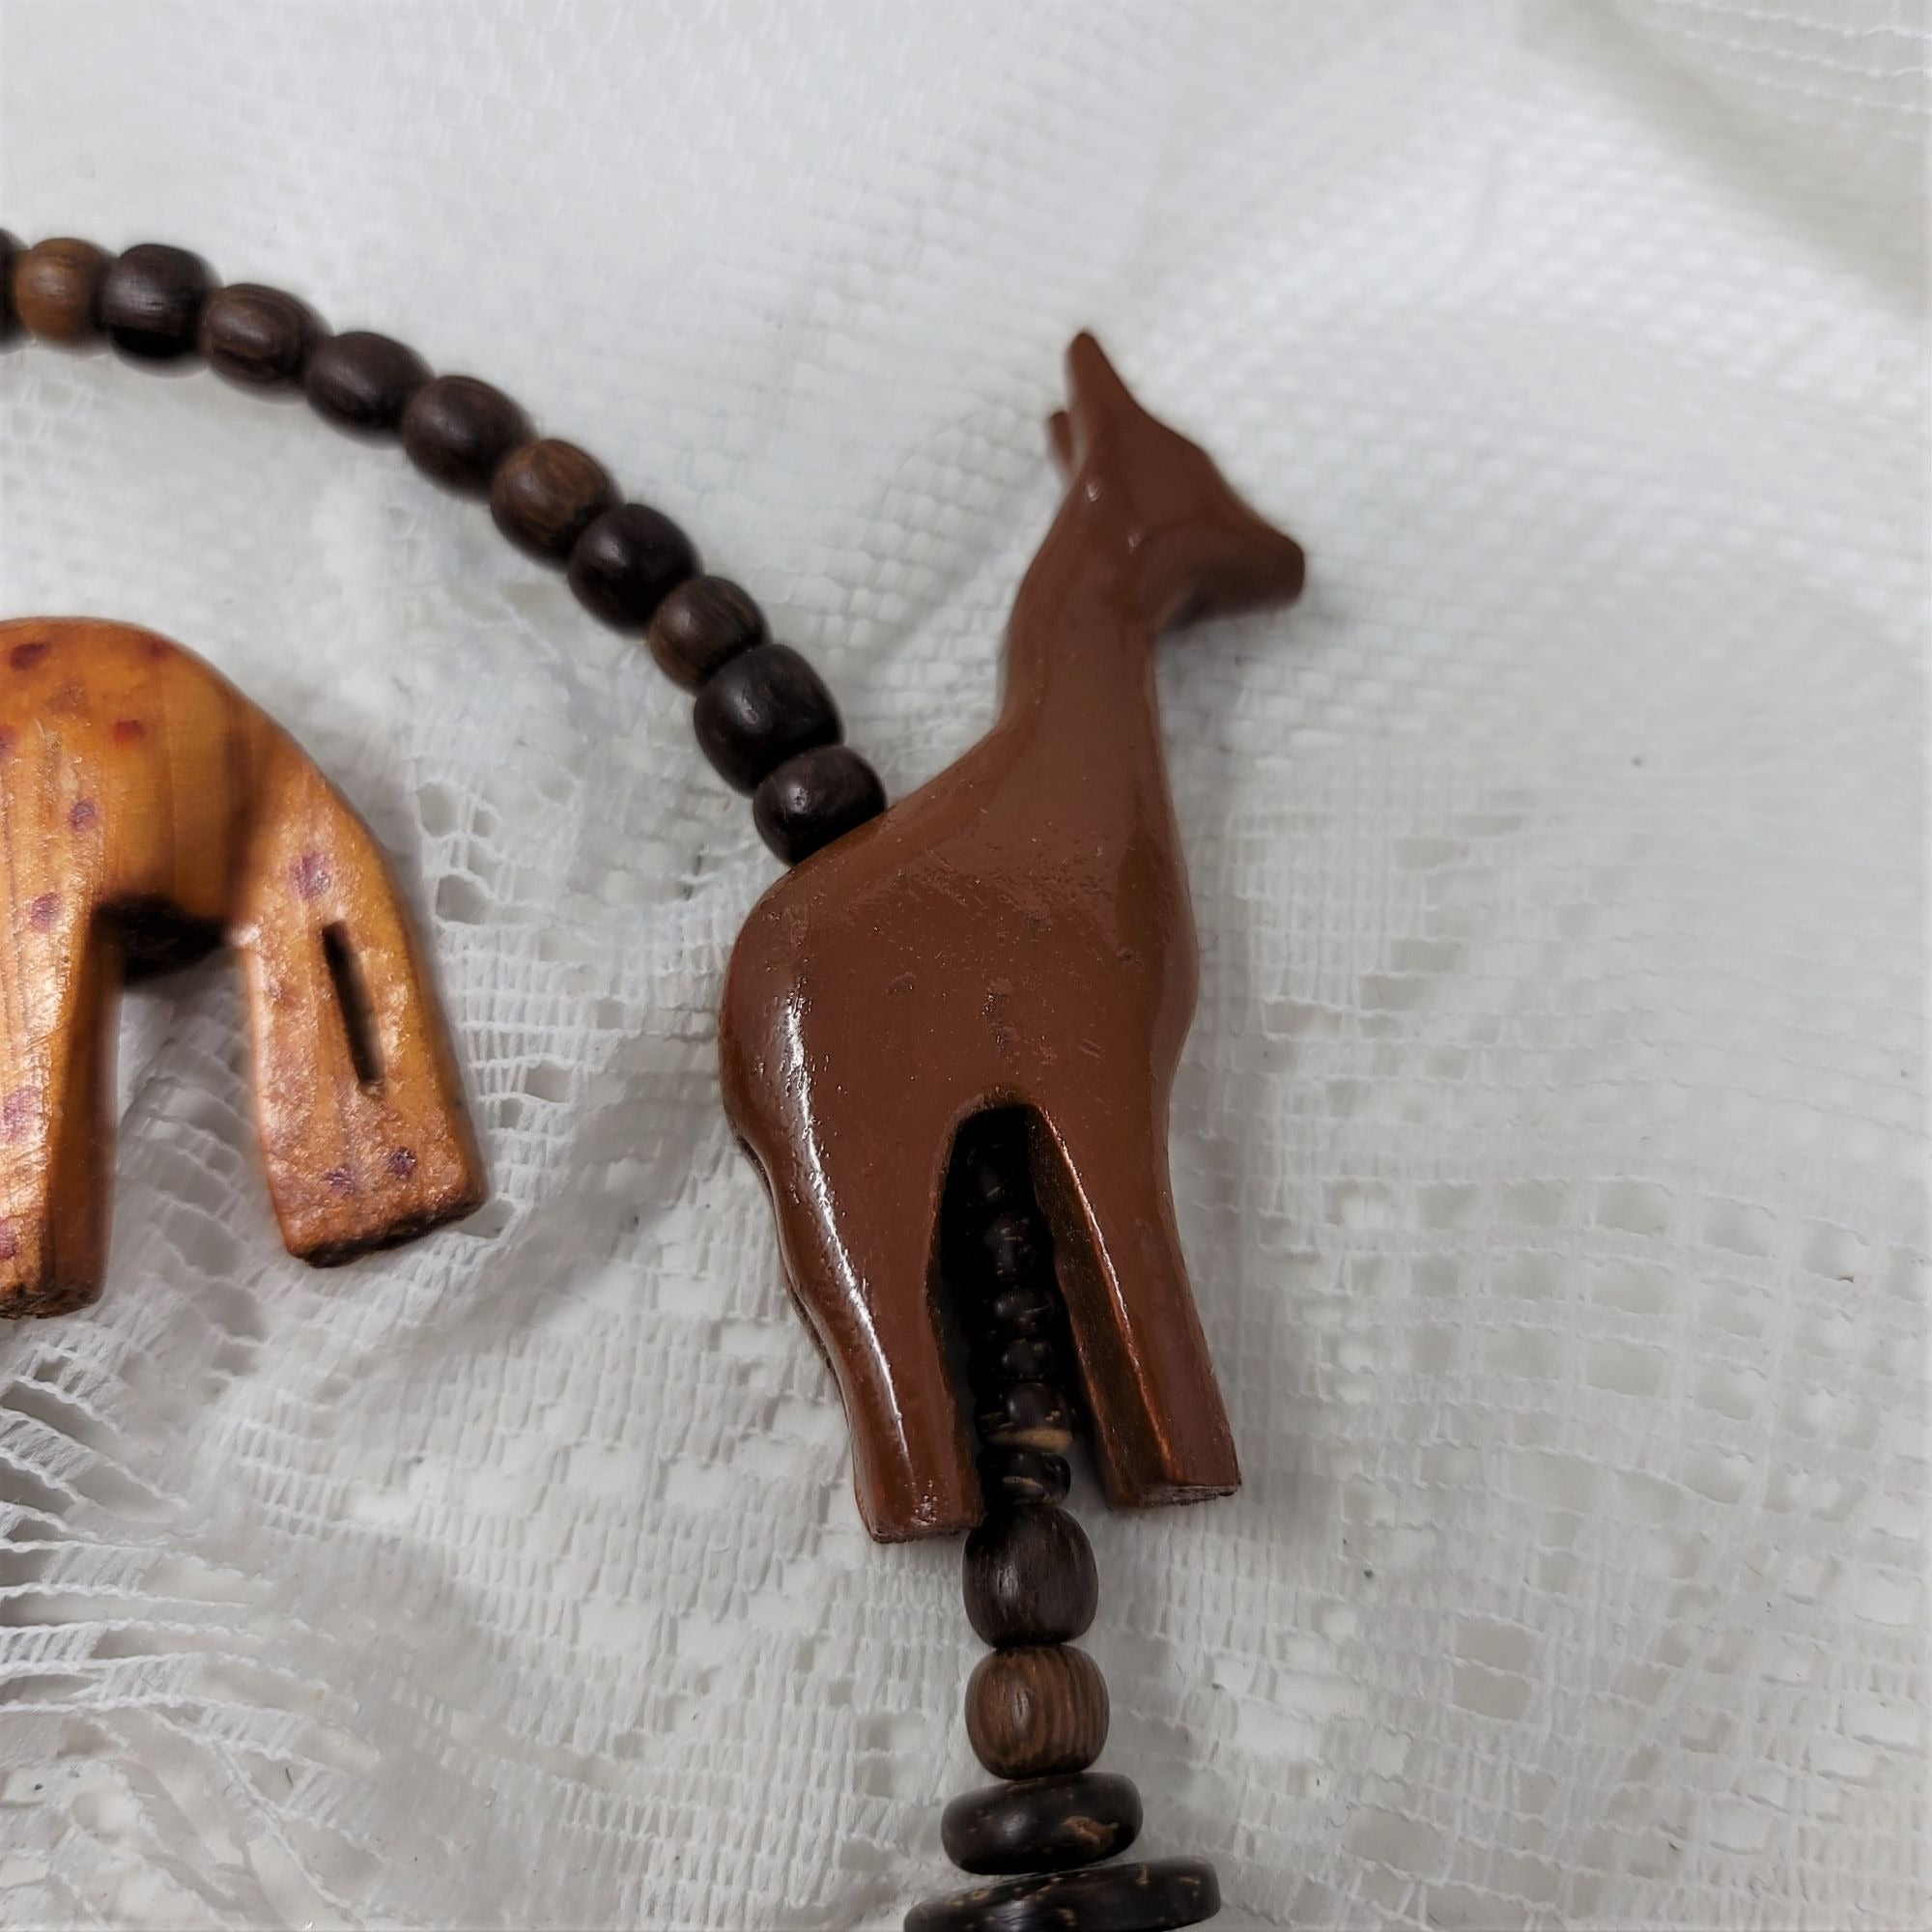 Carved Wood Animal Necklace Unique 30" Long